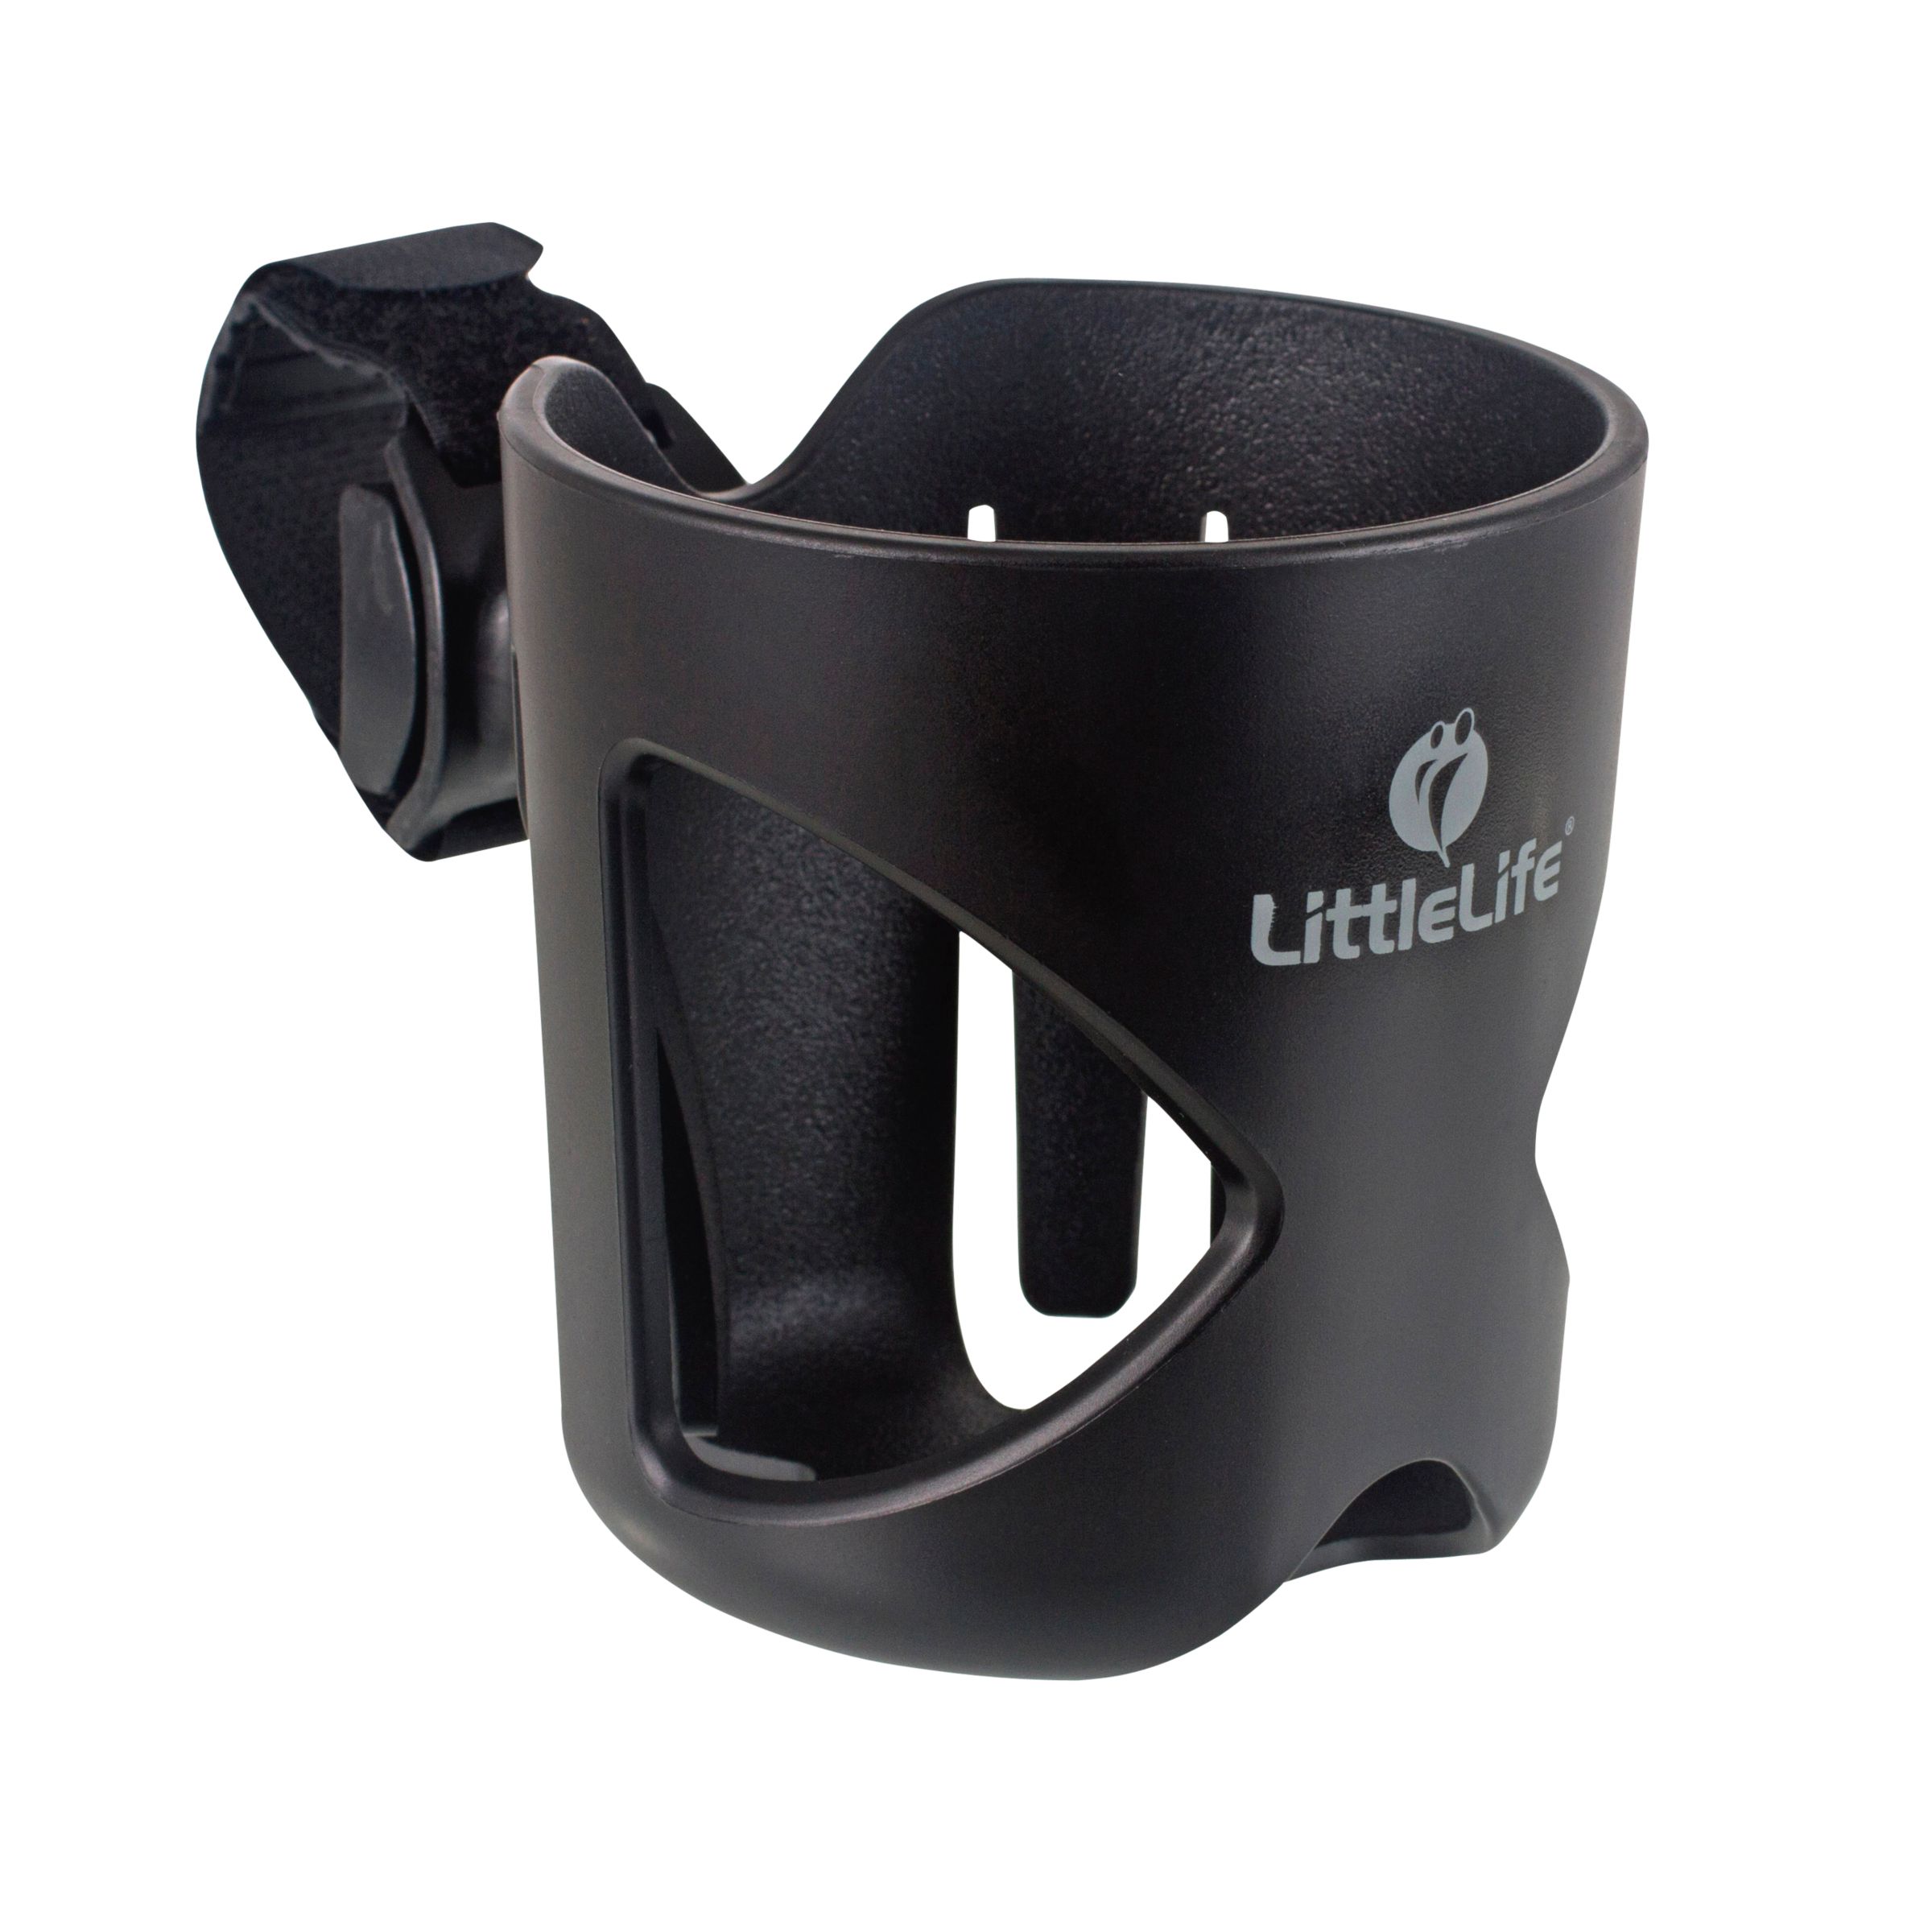 cup holder for buggy